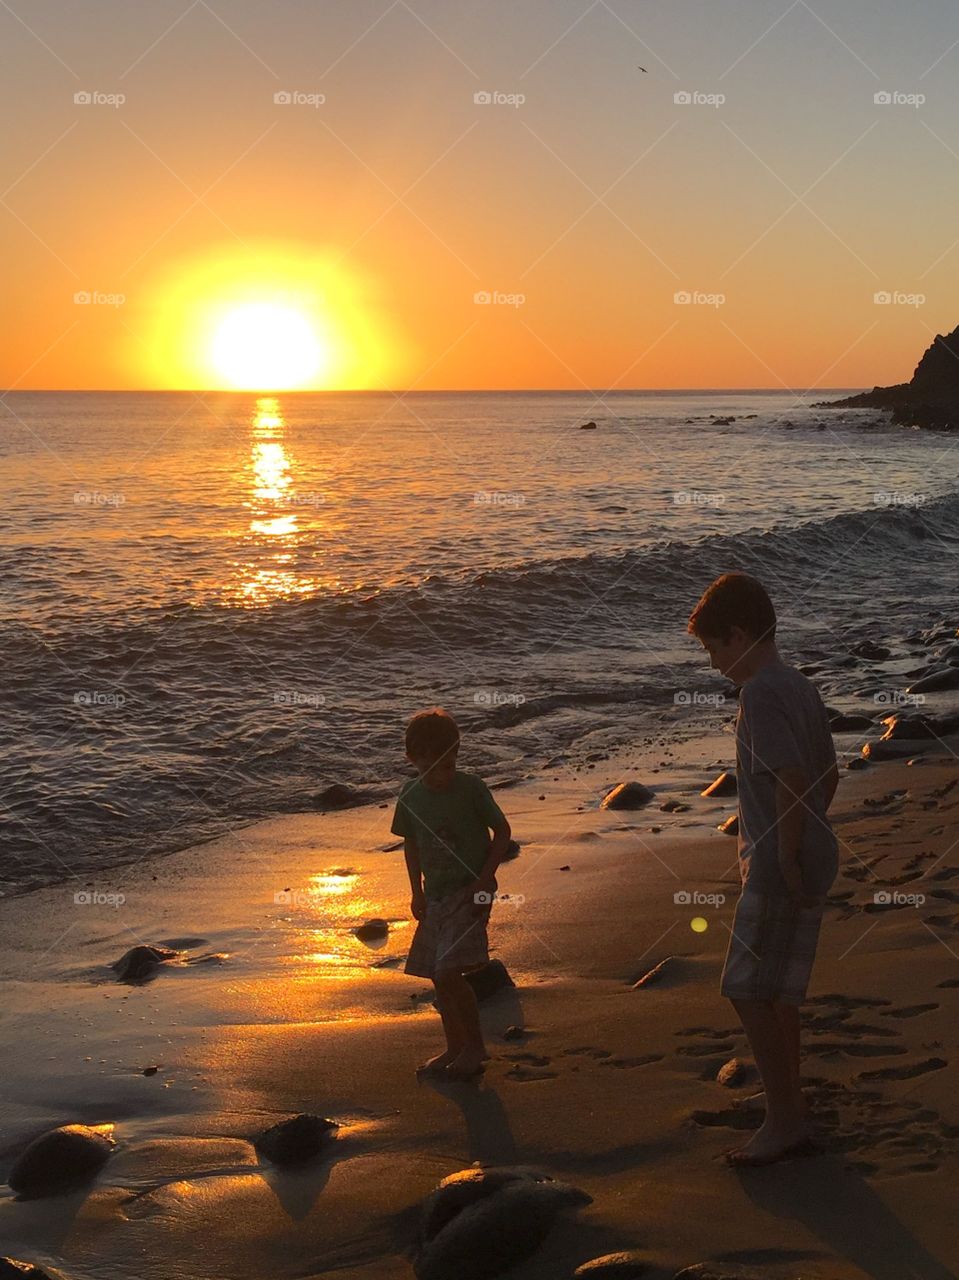 My boys playing on the beach at sunset.